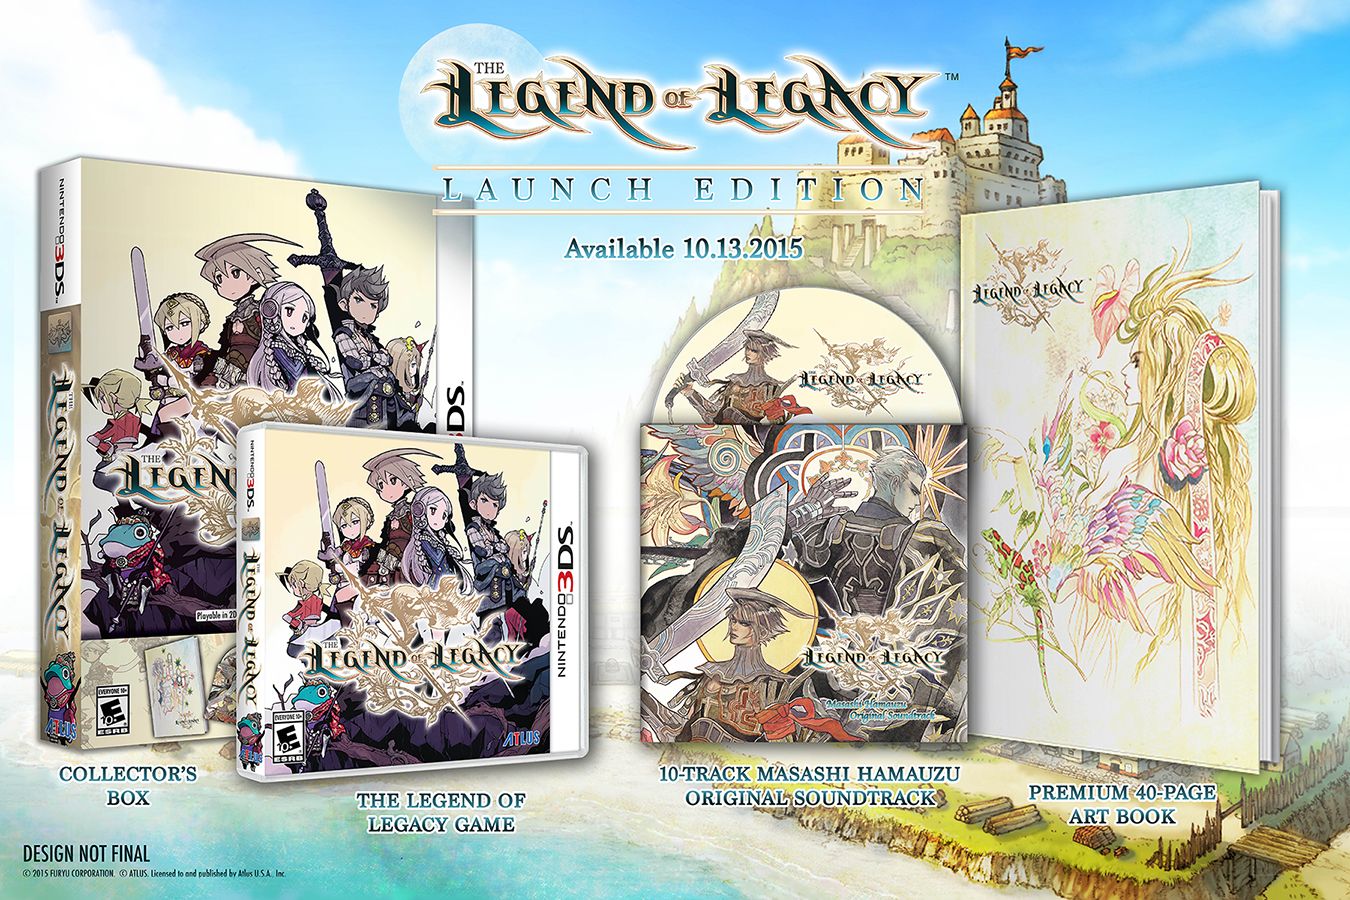 legend-of-legacy-launch-edition